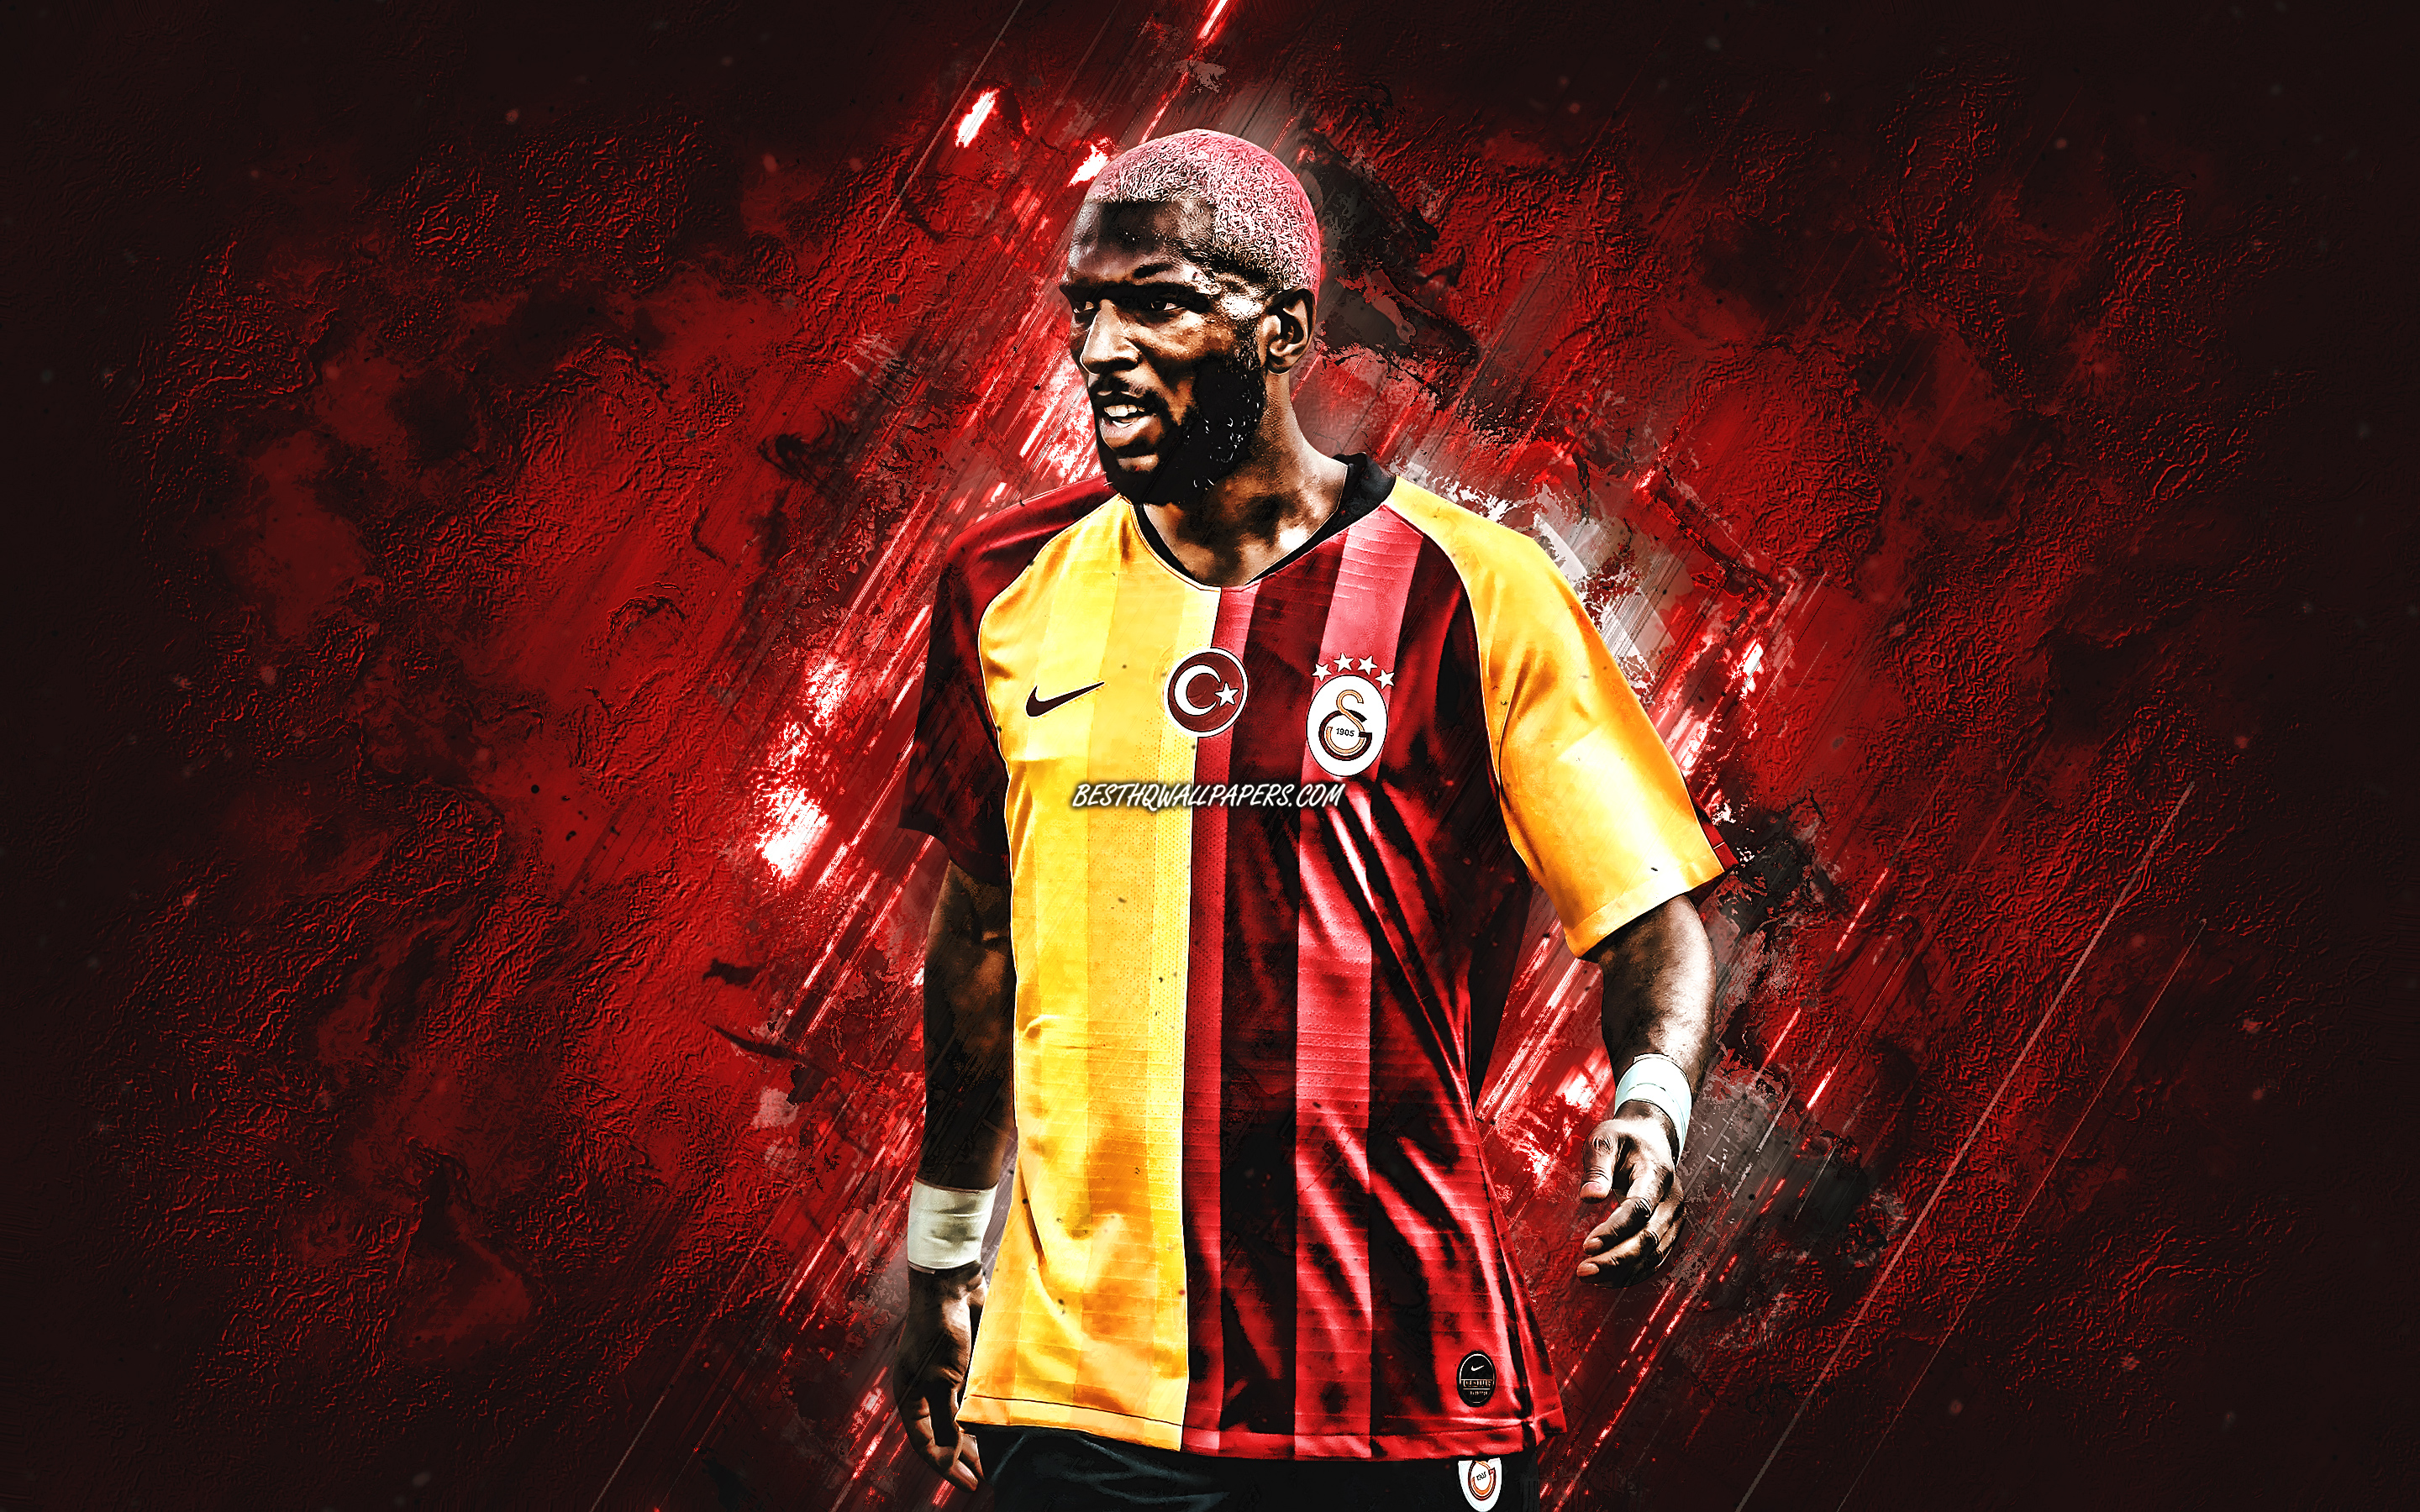 Download wallpaper Ryan Babel, Galatasaray, Dutch professional footballer, forward, portrait, red stone background for desktop with resolution 2880x1800. High Quality HD picture wallpaper